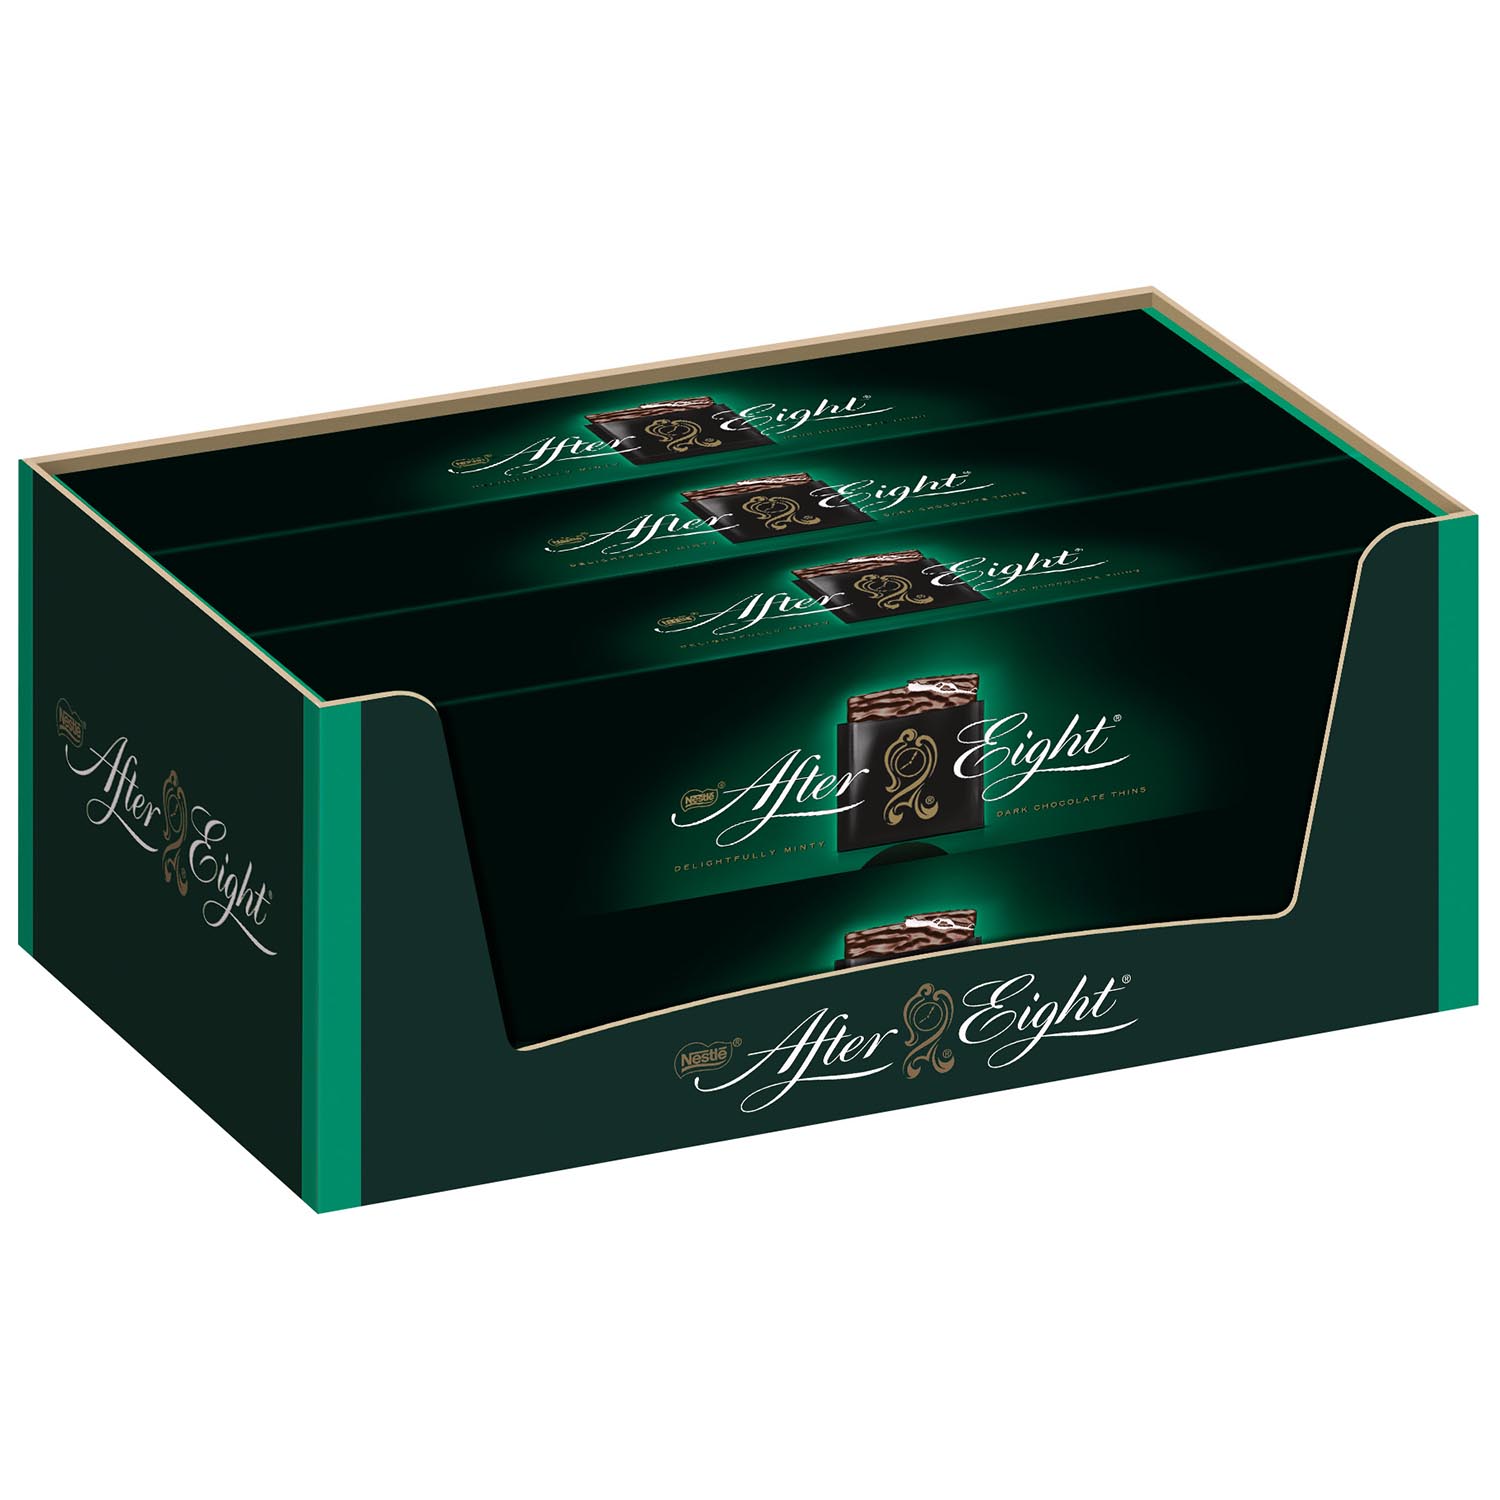 After Eight Classic 400g | Online kaufen im World of Sweets Shop